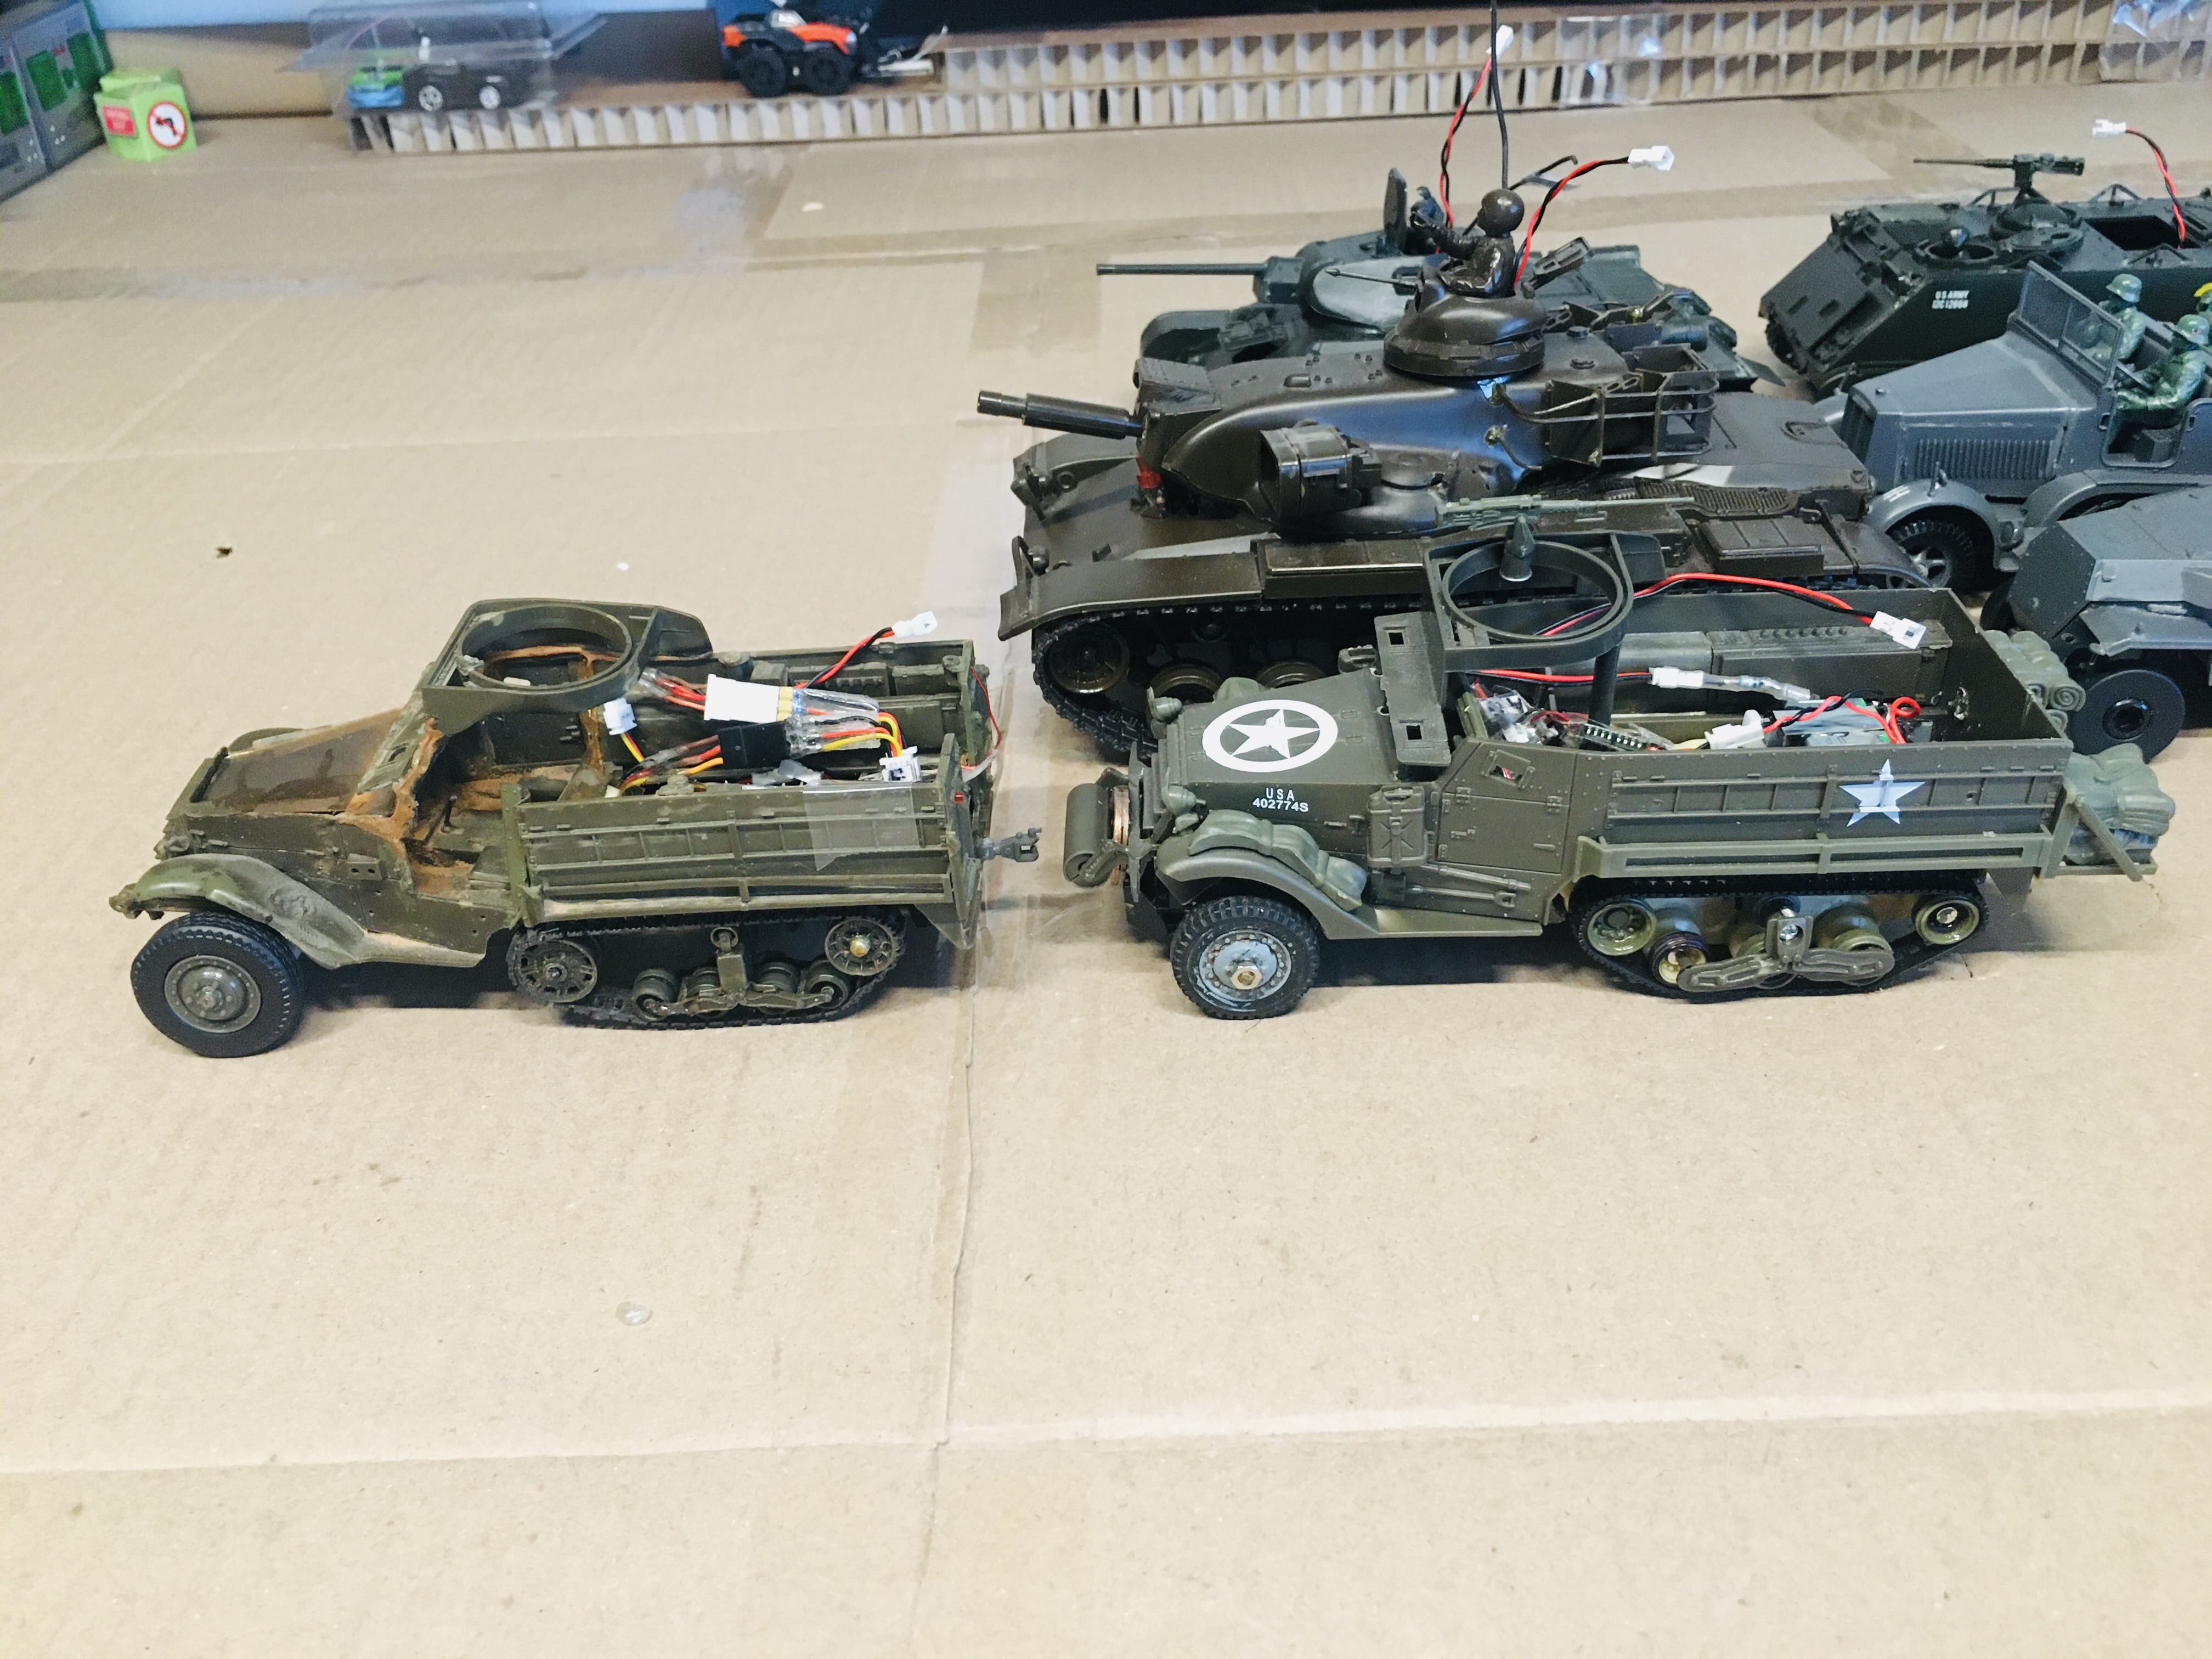 One on the right is the Testers HT. Is not as scale as the Tamiya but I like it all the same.